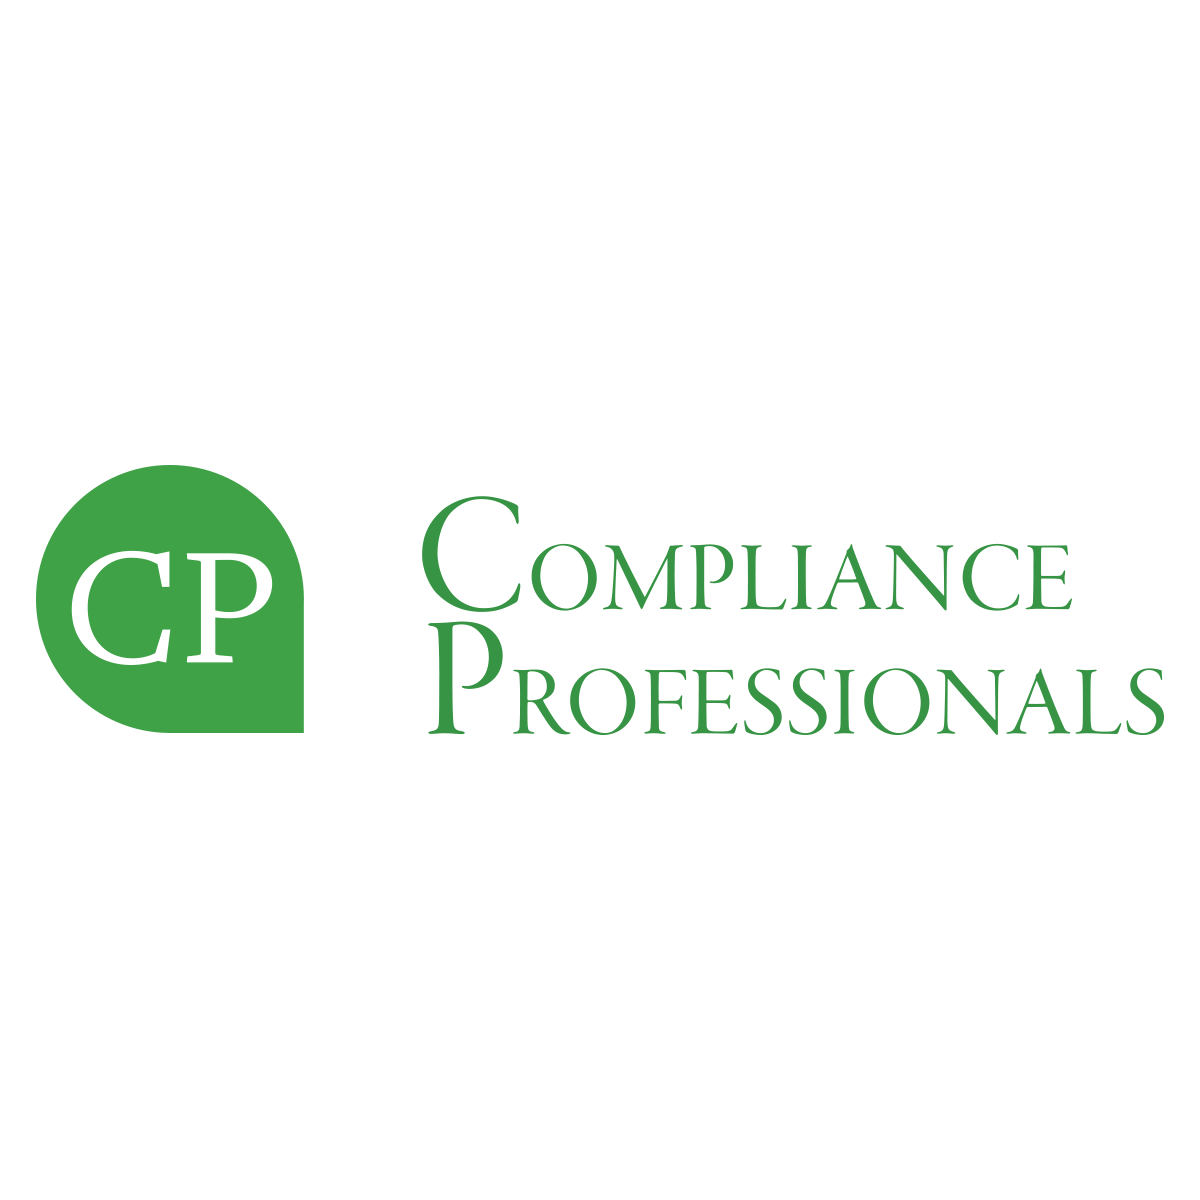 Compliance Professionals